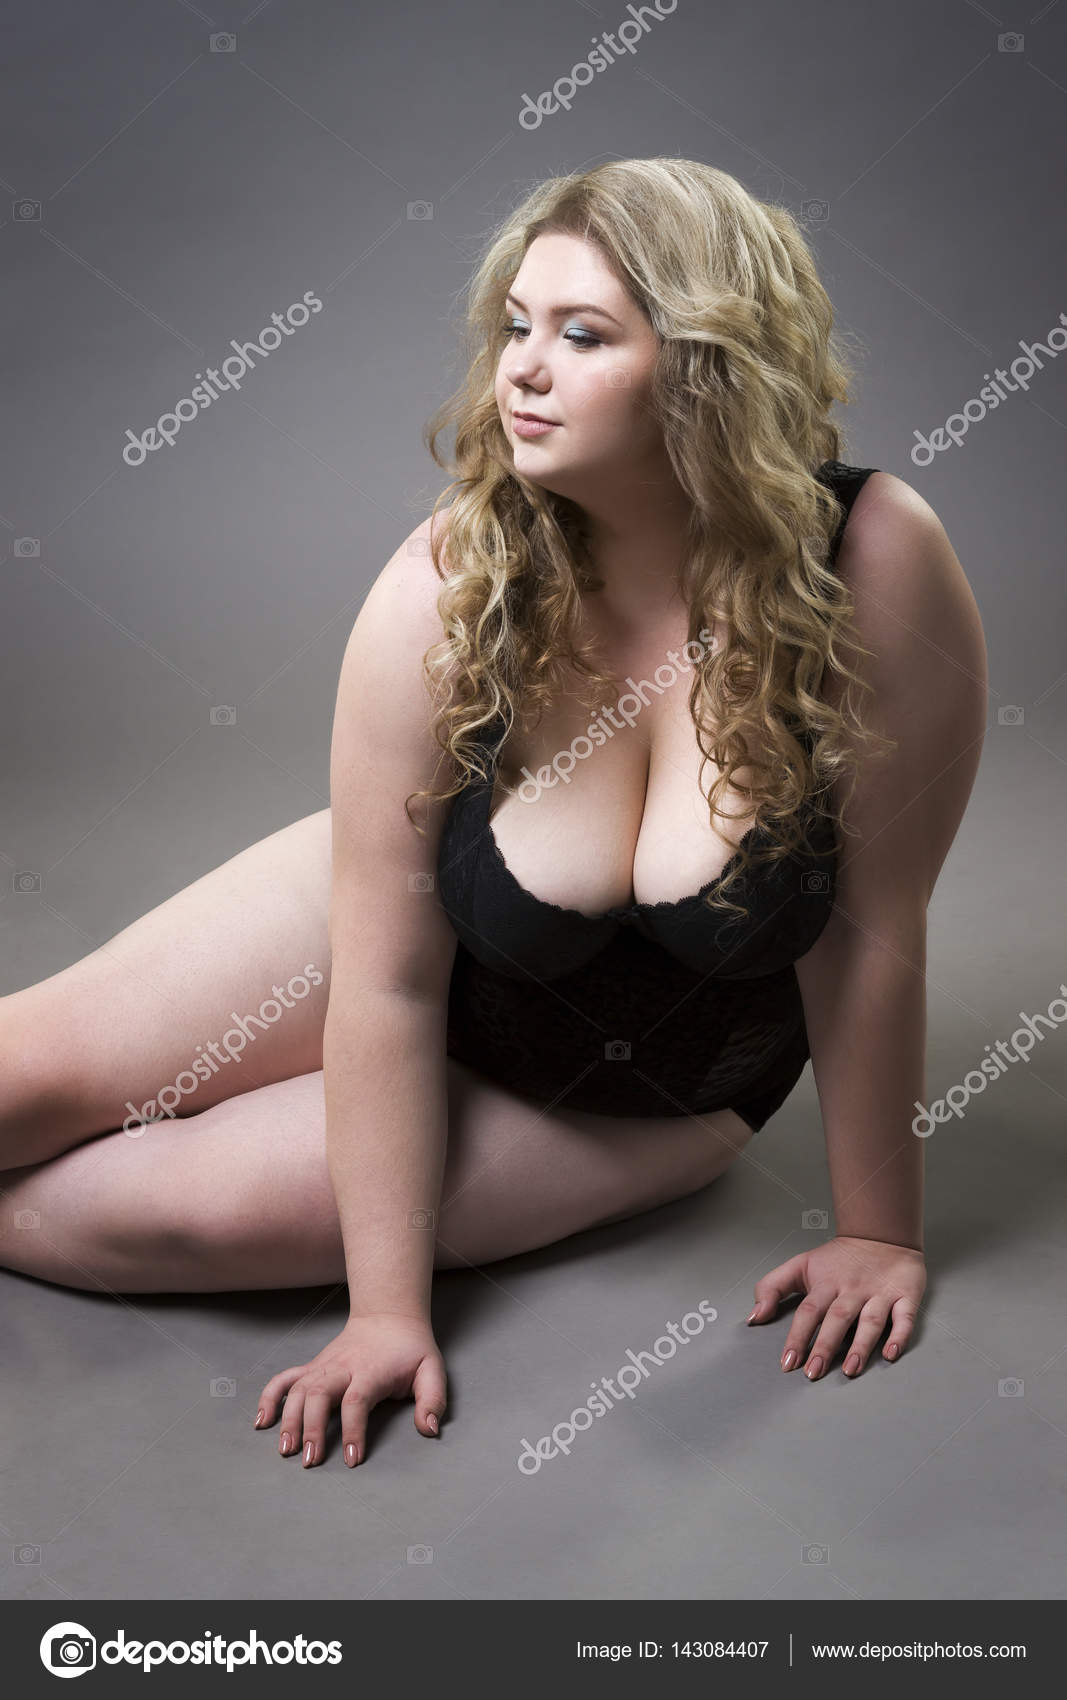 Full figured women in lingerie gallery 10 363 Plus Size Lingerie Stock Photos Free Royalty Free Plus Size Lingerie Images Depositphotos